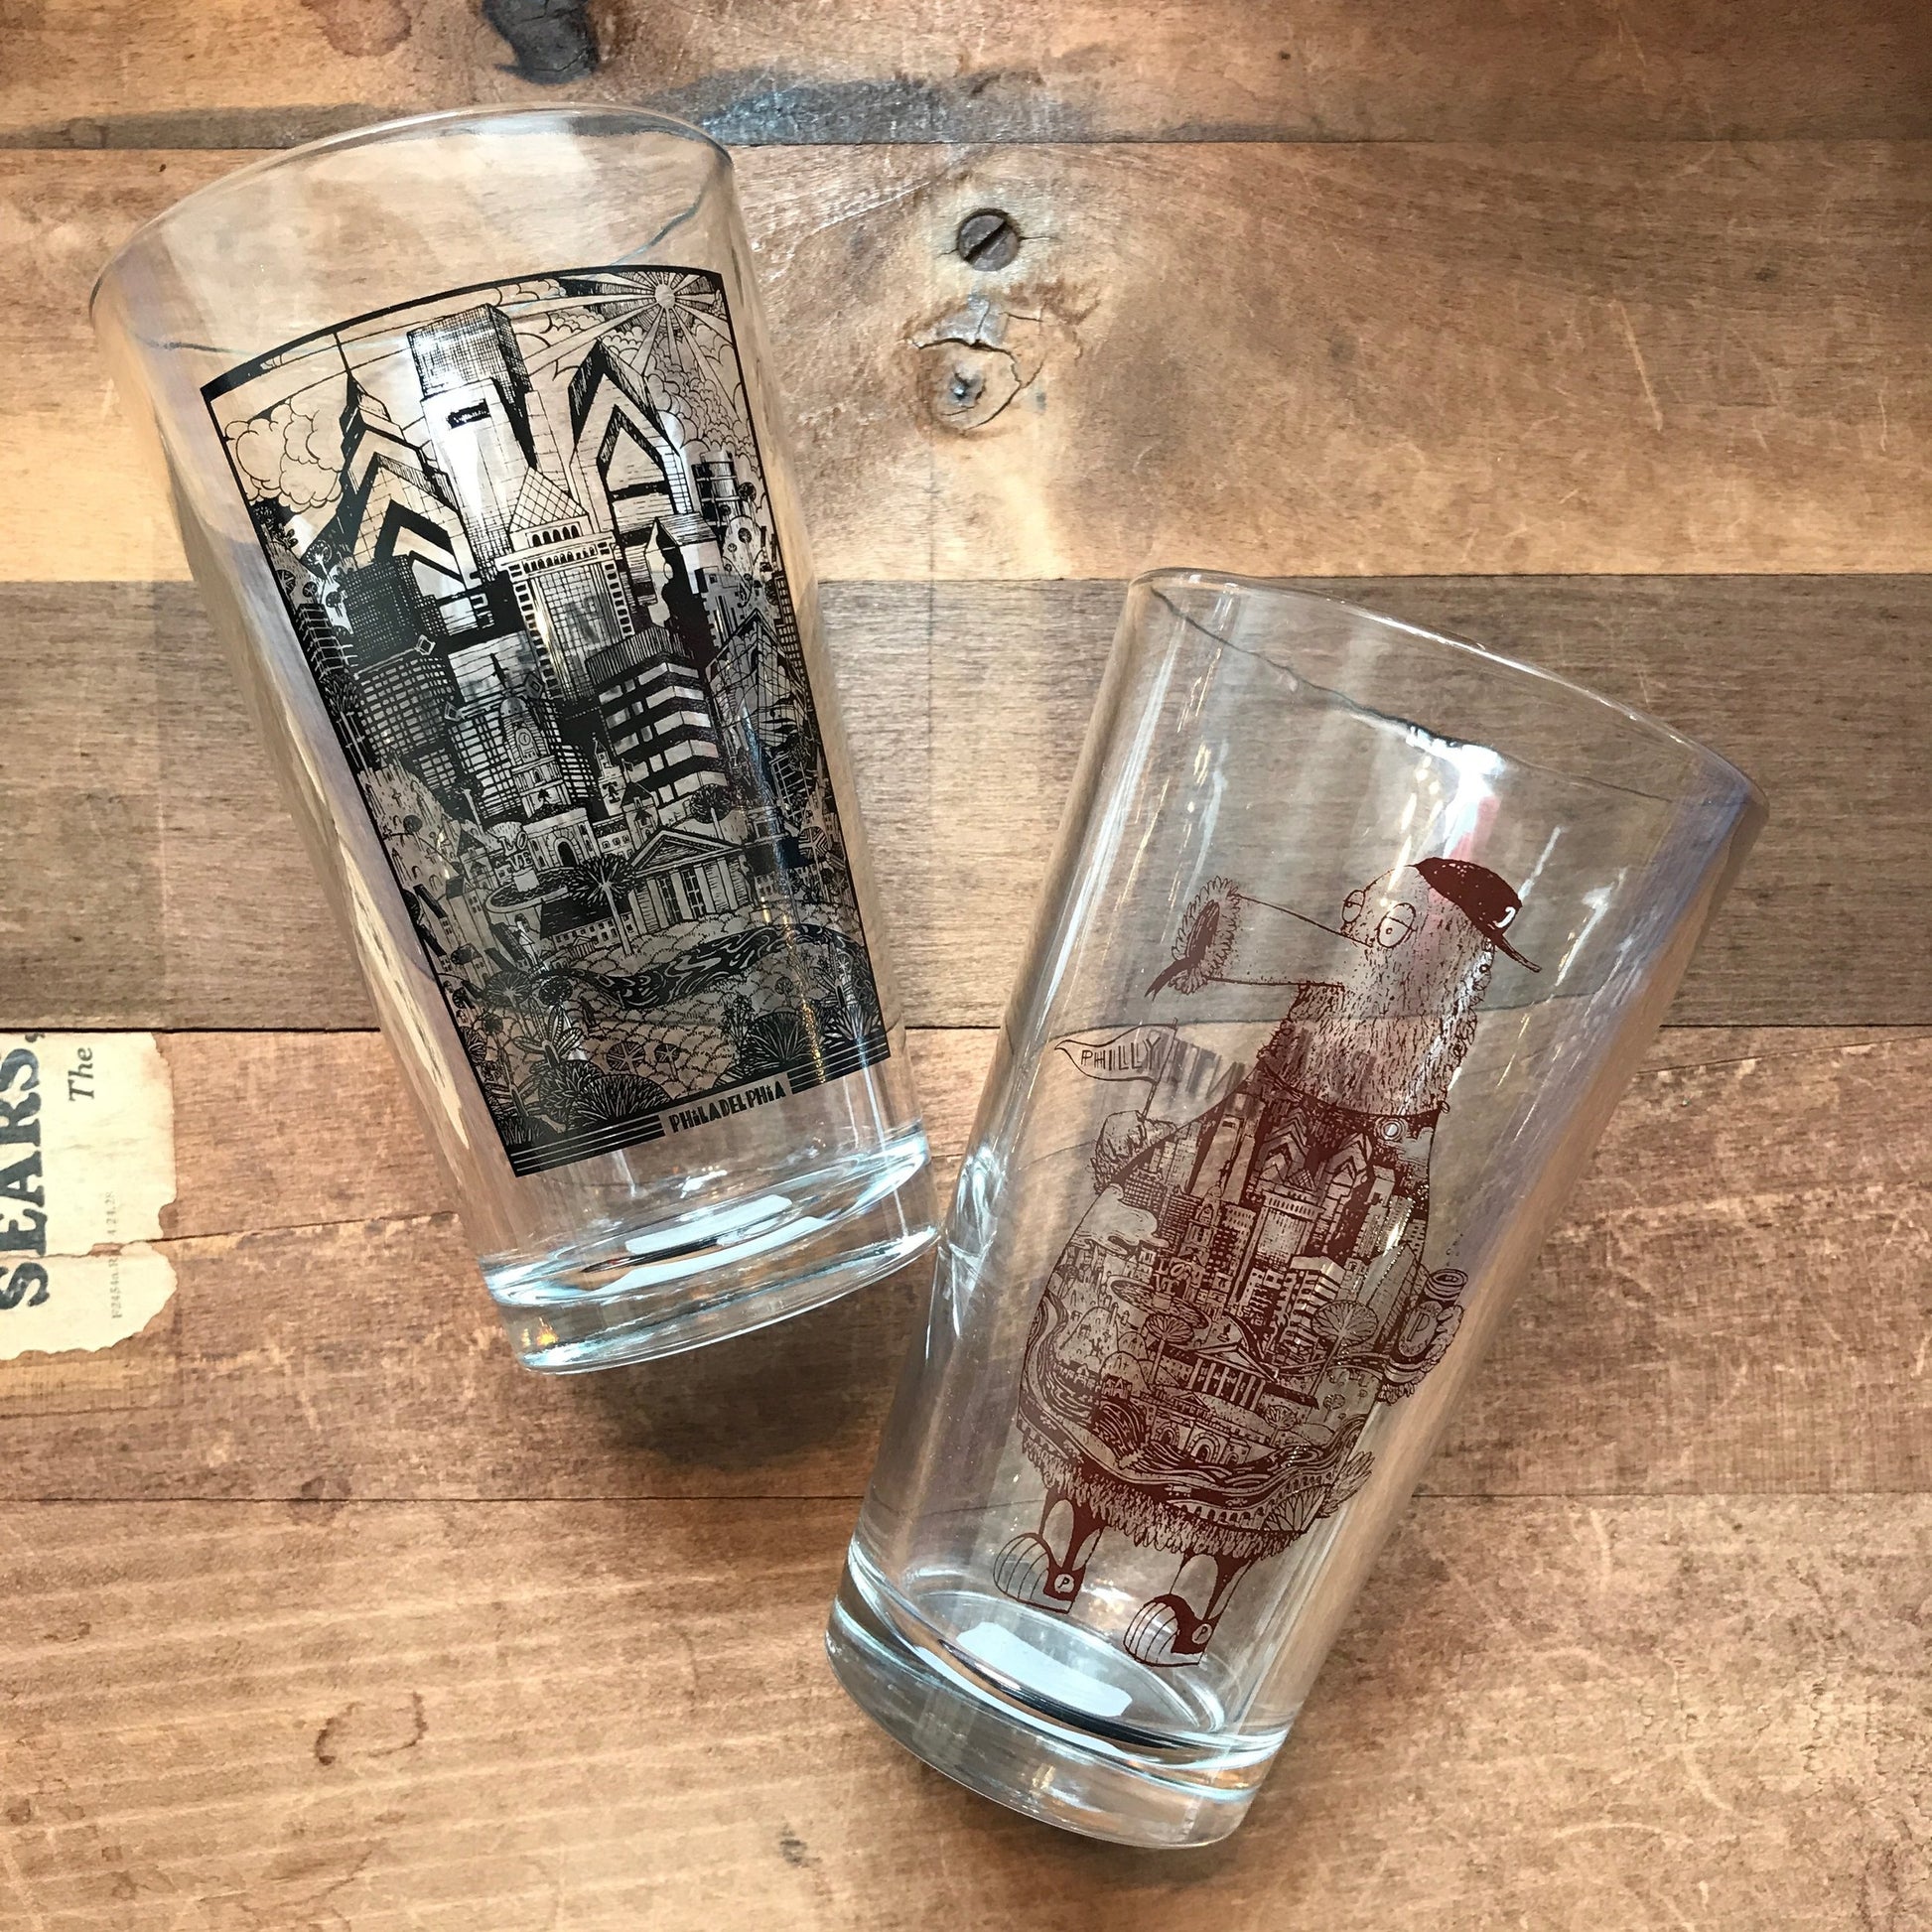 Two Paul Carpenter Philly Pint Glasses laying on a wooden surface, one upright with a Philadelphia-themed skyline design and the other tilted with a ship illustration.